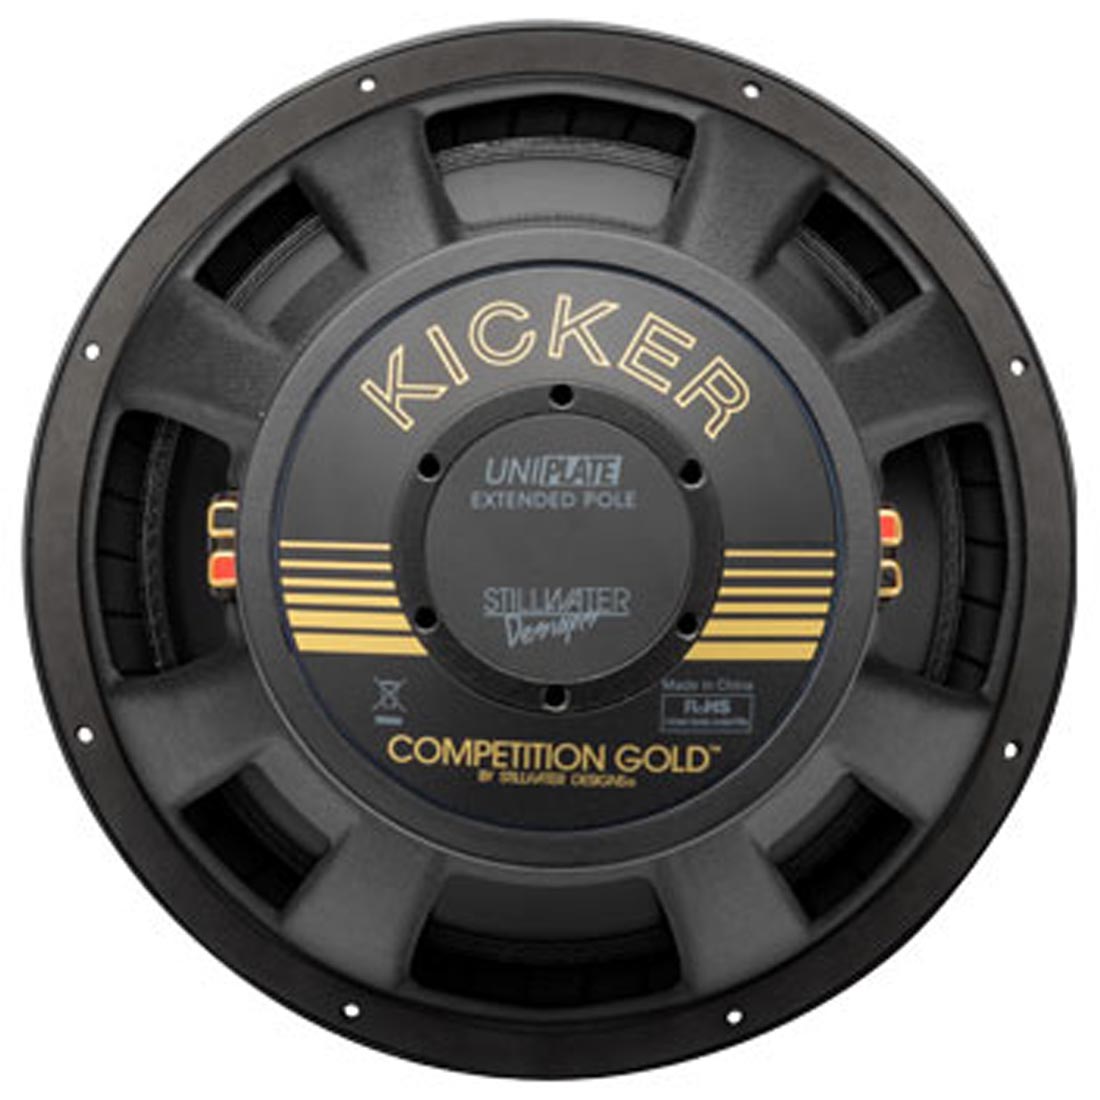 Kicker 50GOLD154 50th Anniversary 15" Competition Gold 4-Ohm Subwoofer